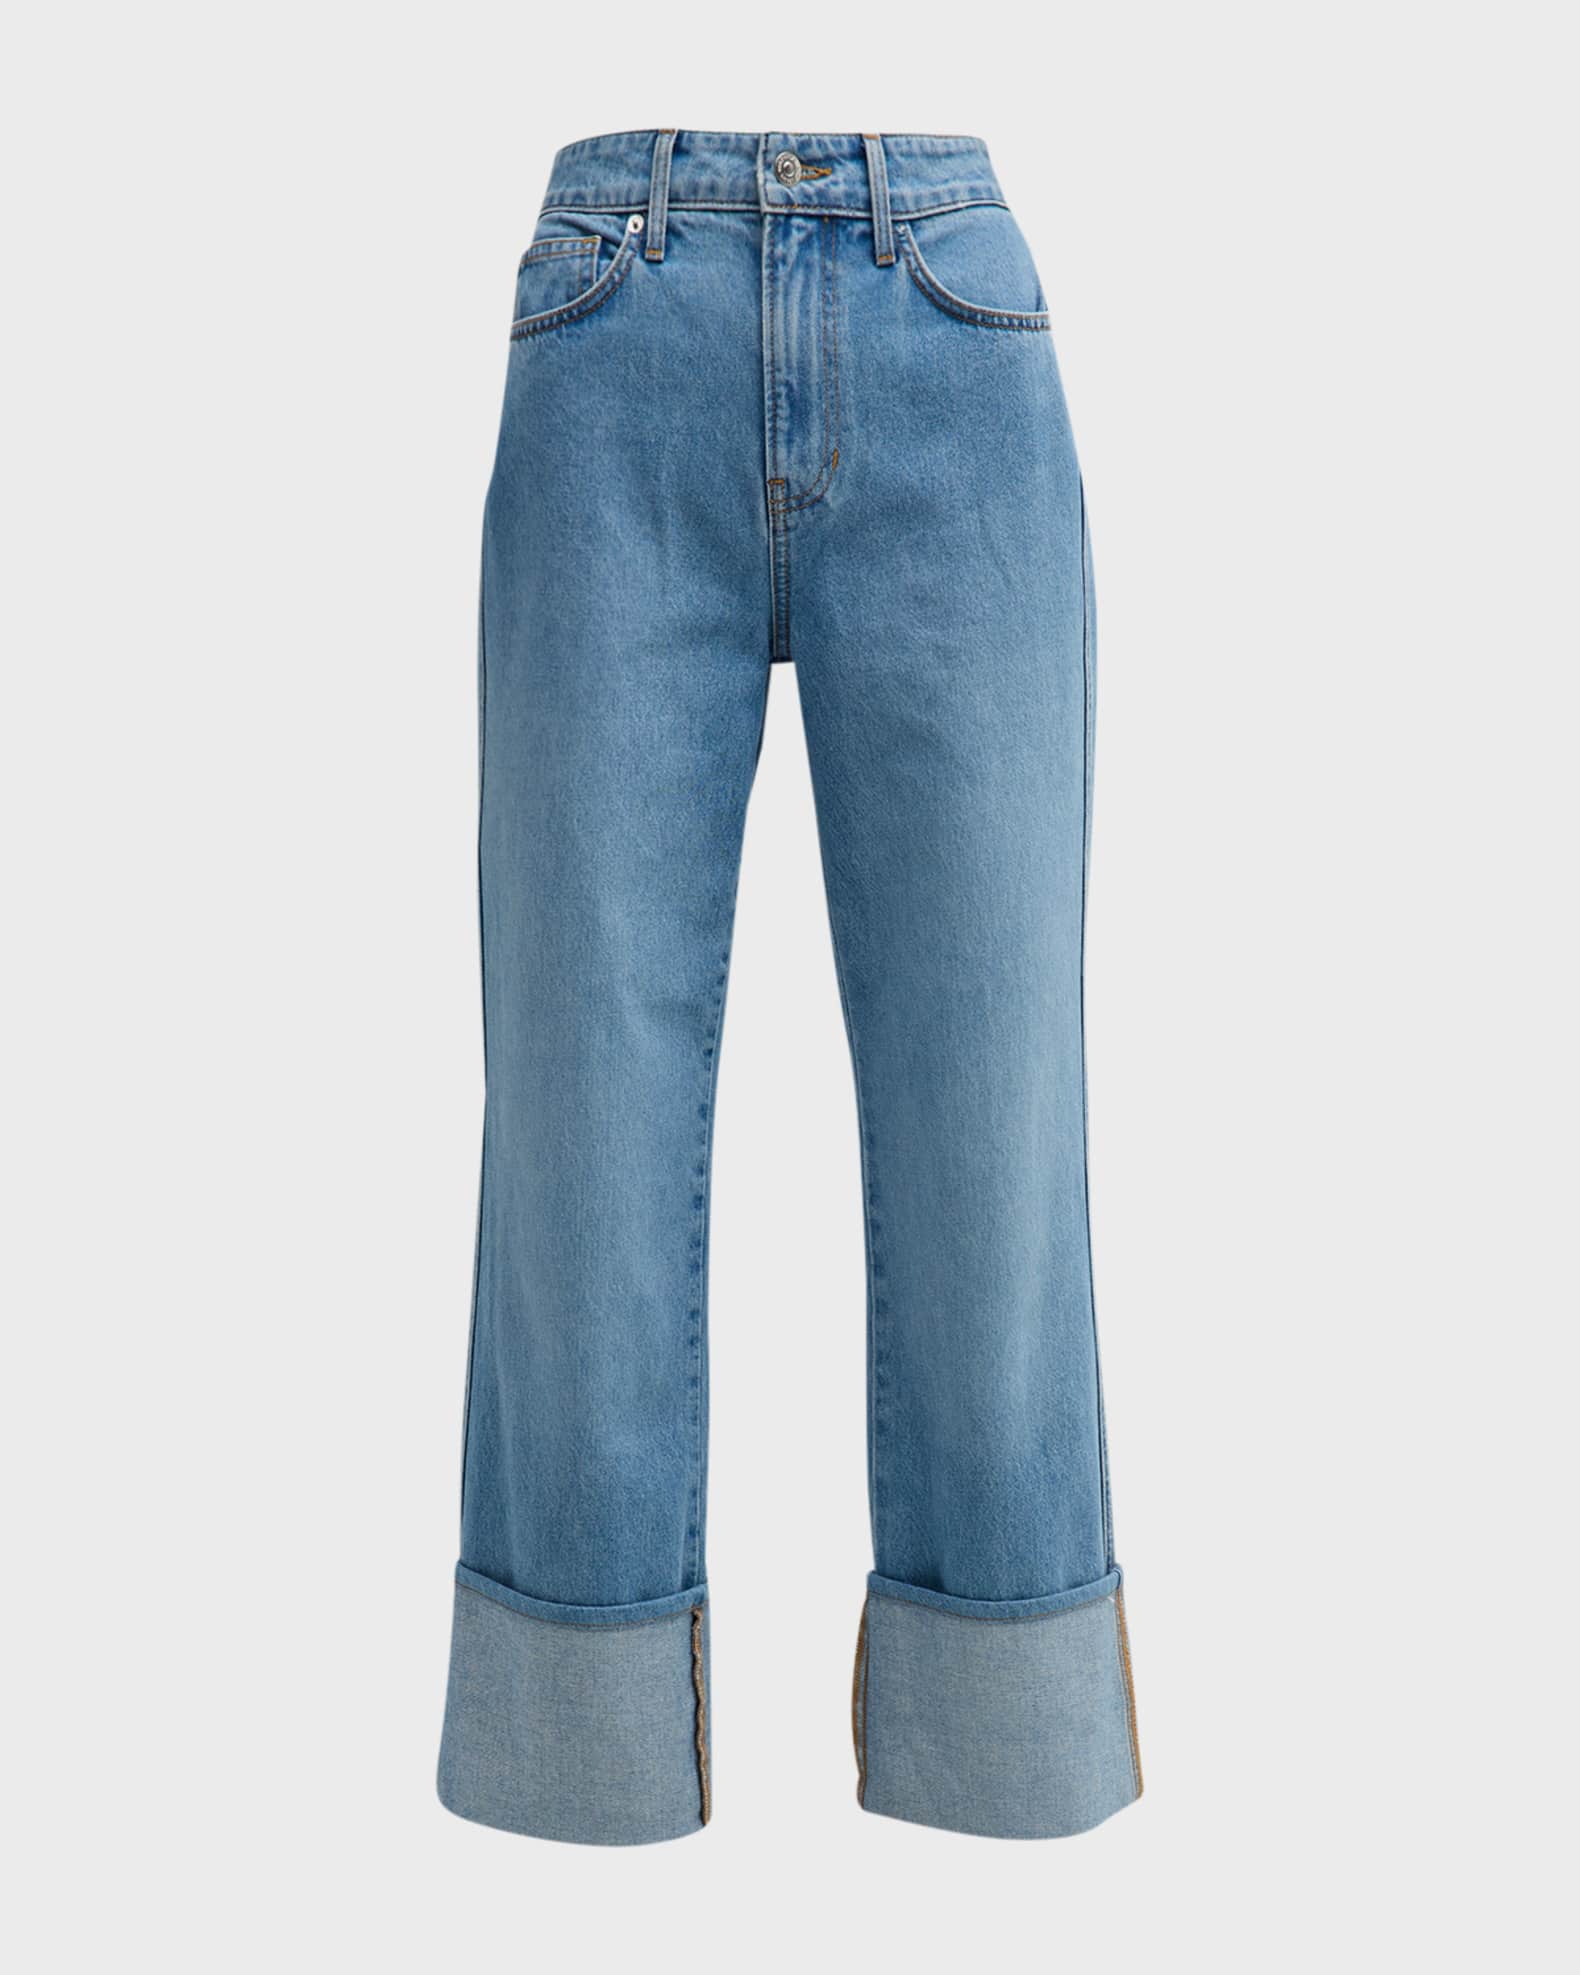 Veronica Beard Jeans Dylan High Rise Straight Cuffed Jeans | Neiman Marcus